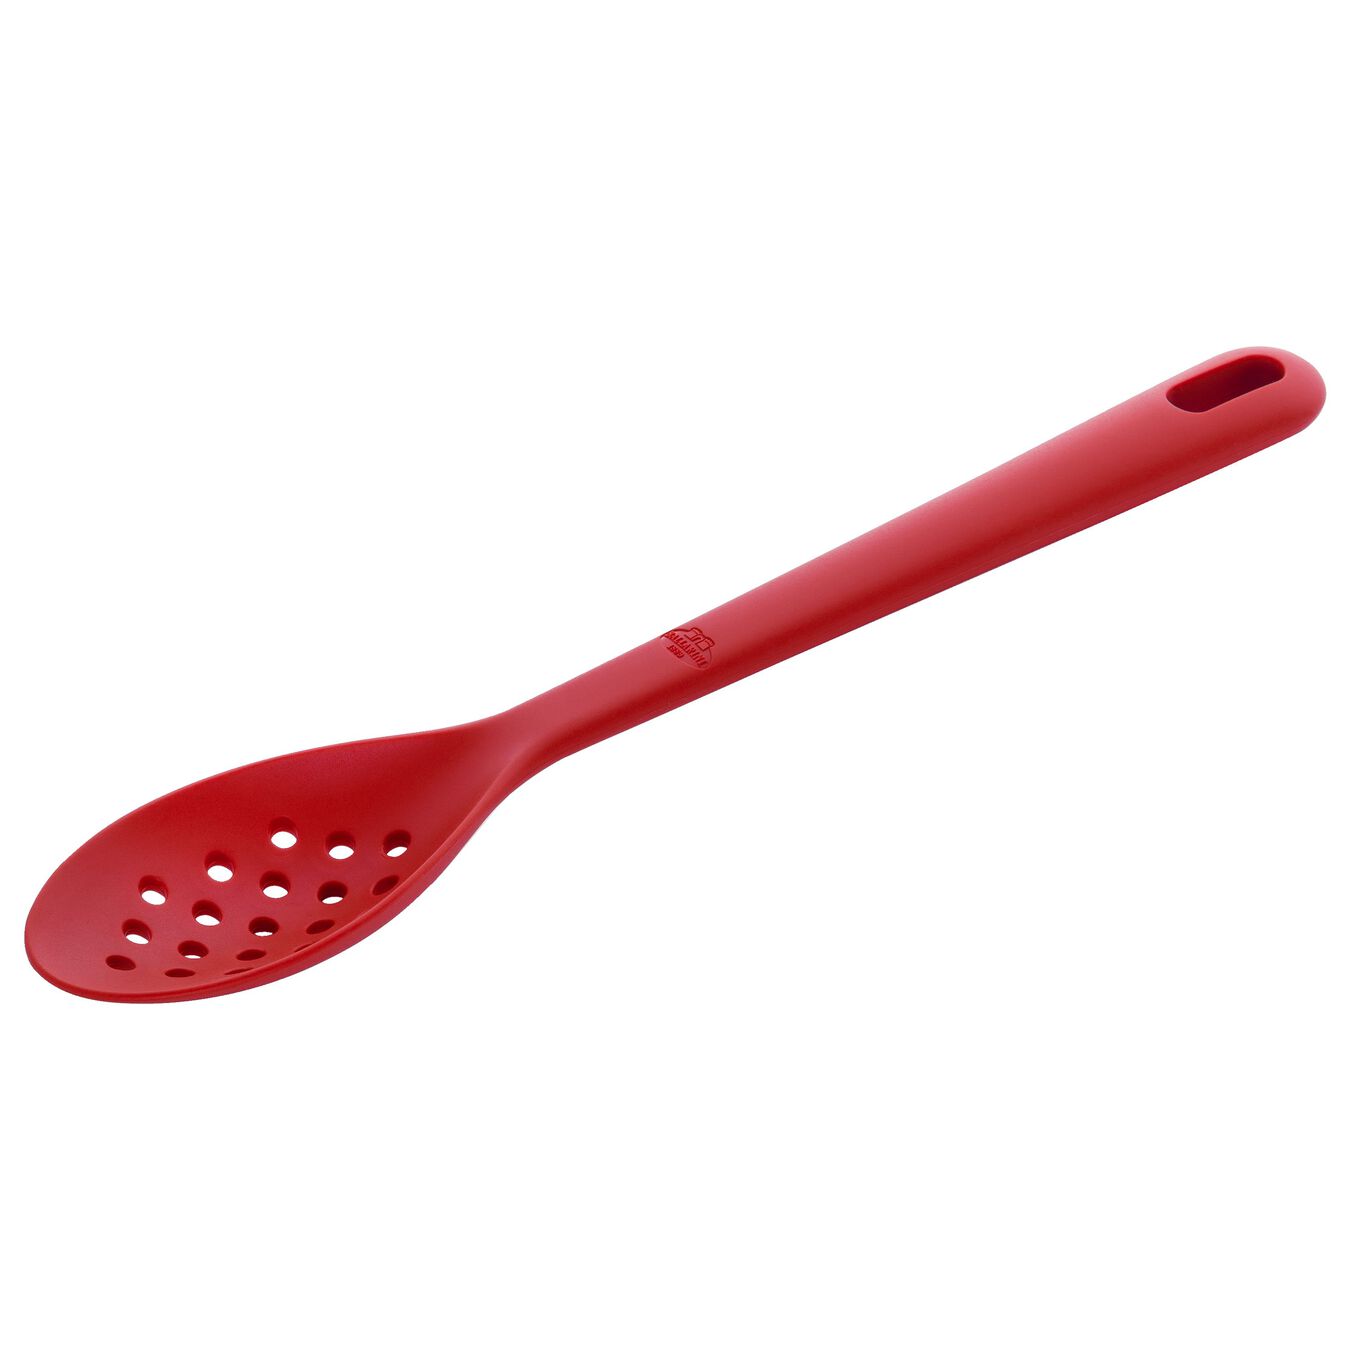 Skimming spoon, 31 cm, silicone,,large 1